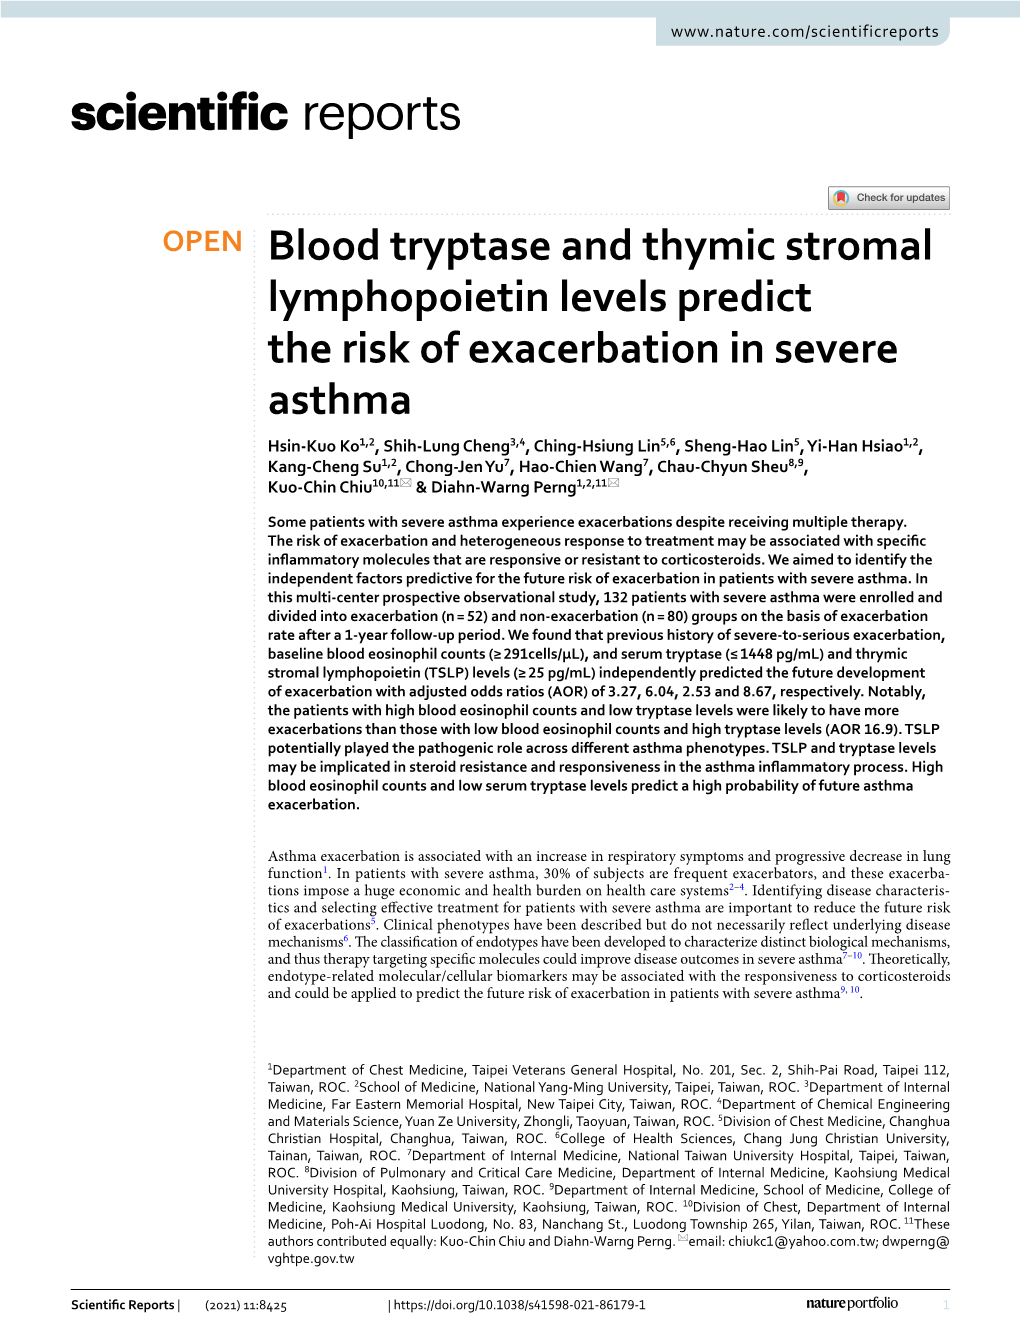 Blood Tryptase and Thymic Stromal Lymphopoietin Levels Predict the Risk of Exacerbation in Severe Asthma